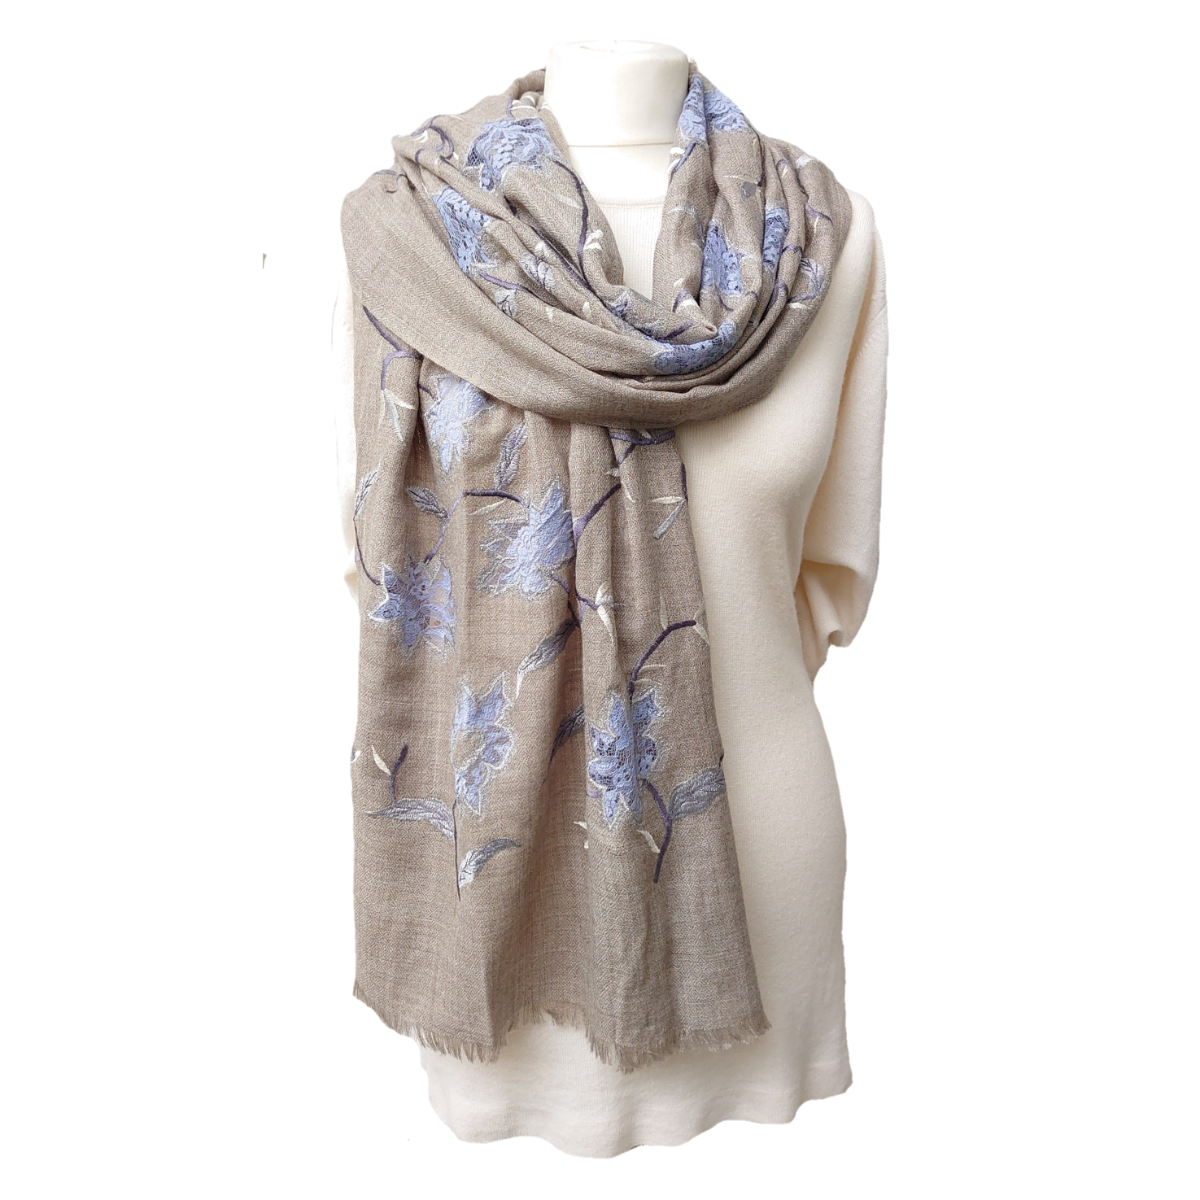 100% Pure Pashmina Cashmere Stole - Large Scarf With Flowers Embroidery